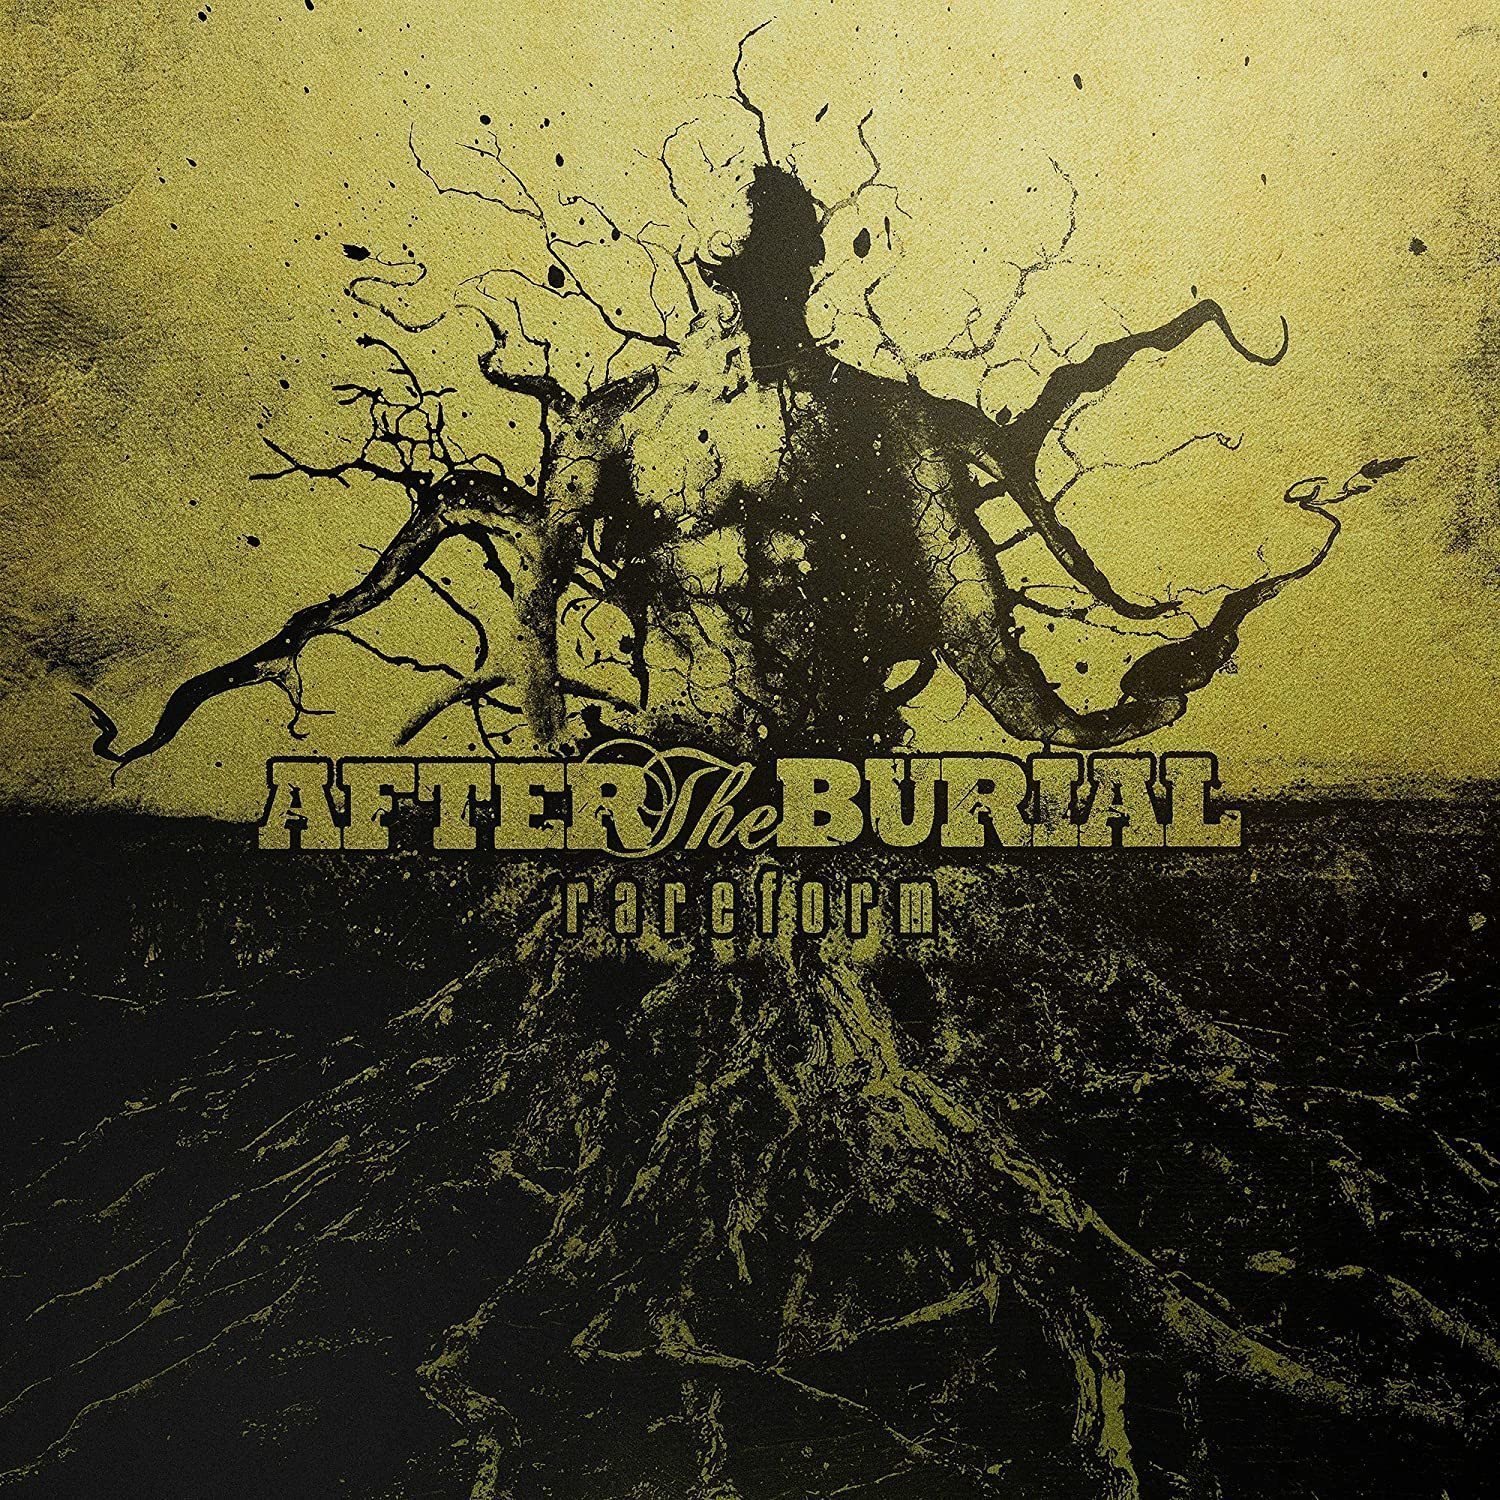 Vinyl Record After the Burial - Rareform (10 Year Anniversary) (LP)